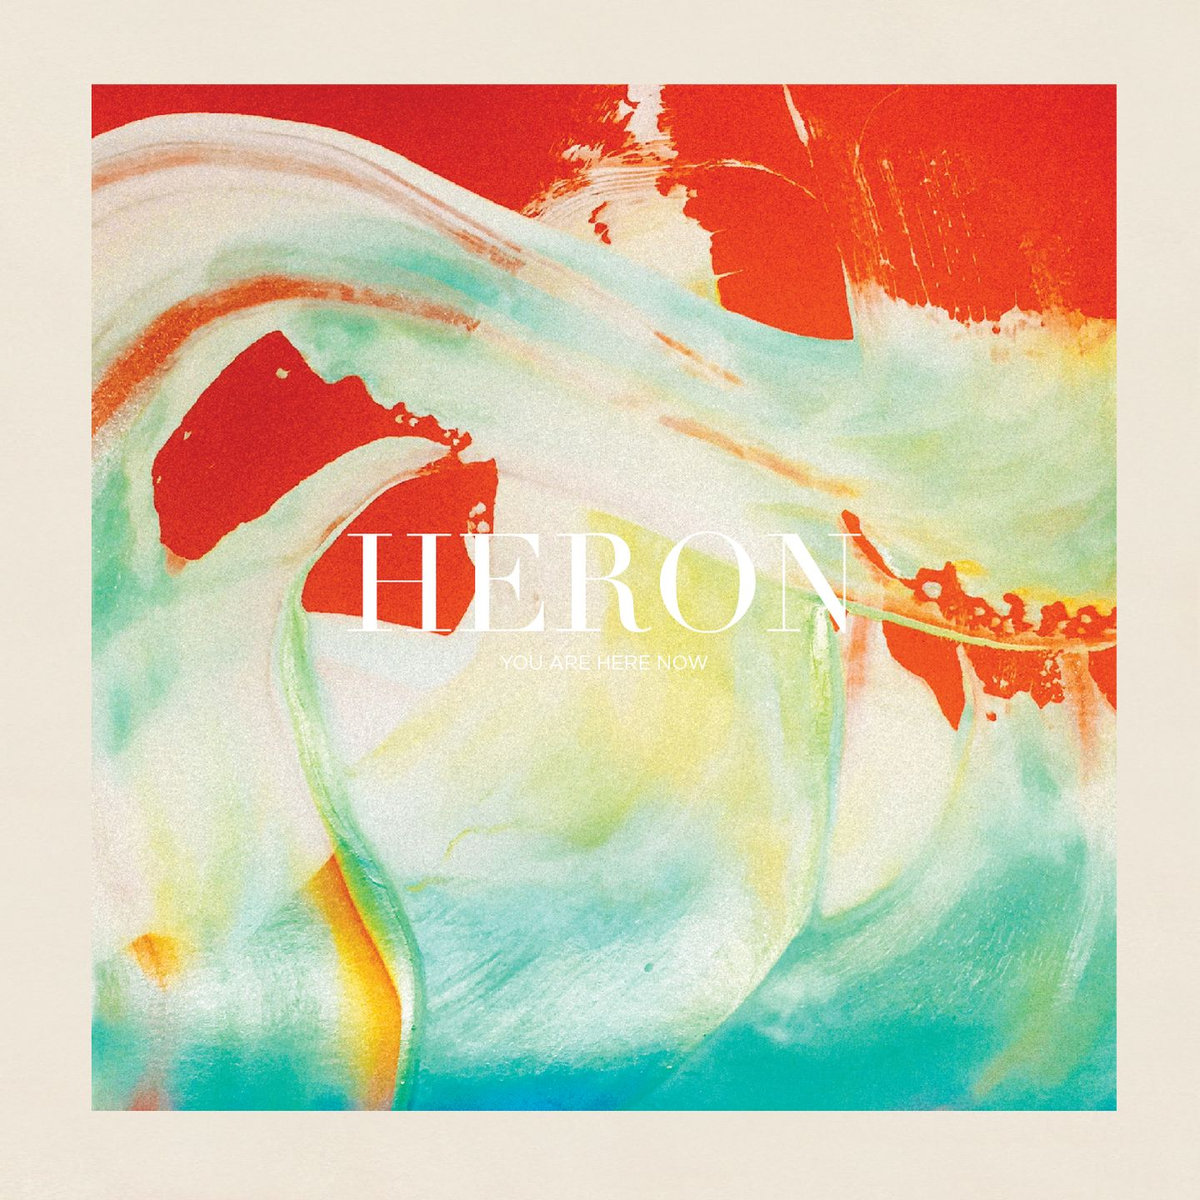 Heron – You Are Here Now